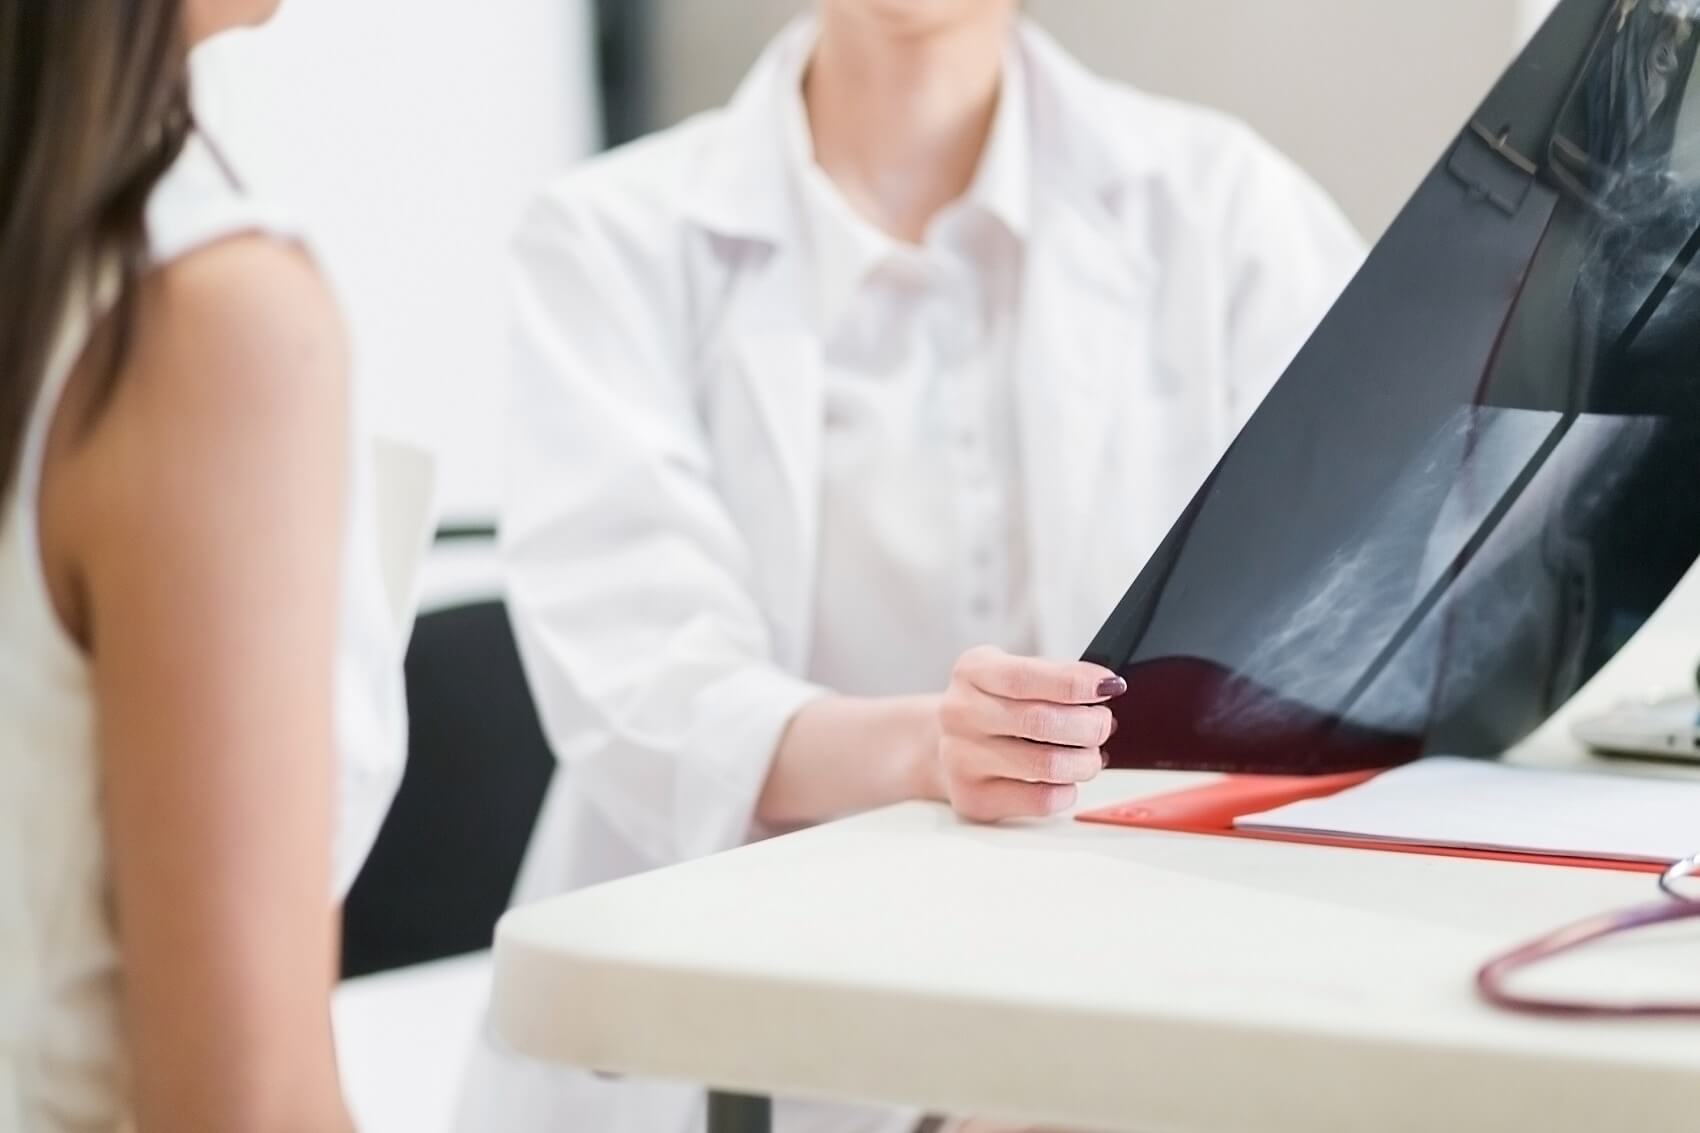 OBGYN Provider looking over mammogram results with patient